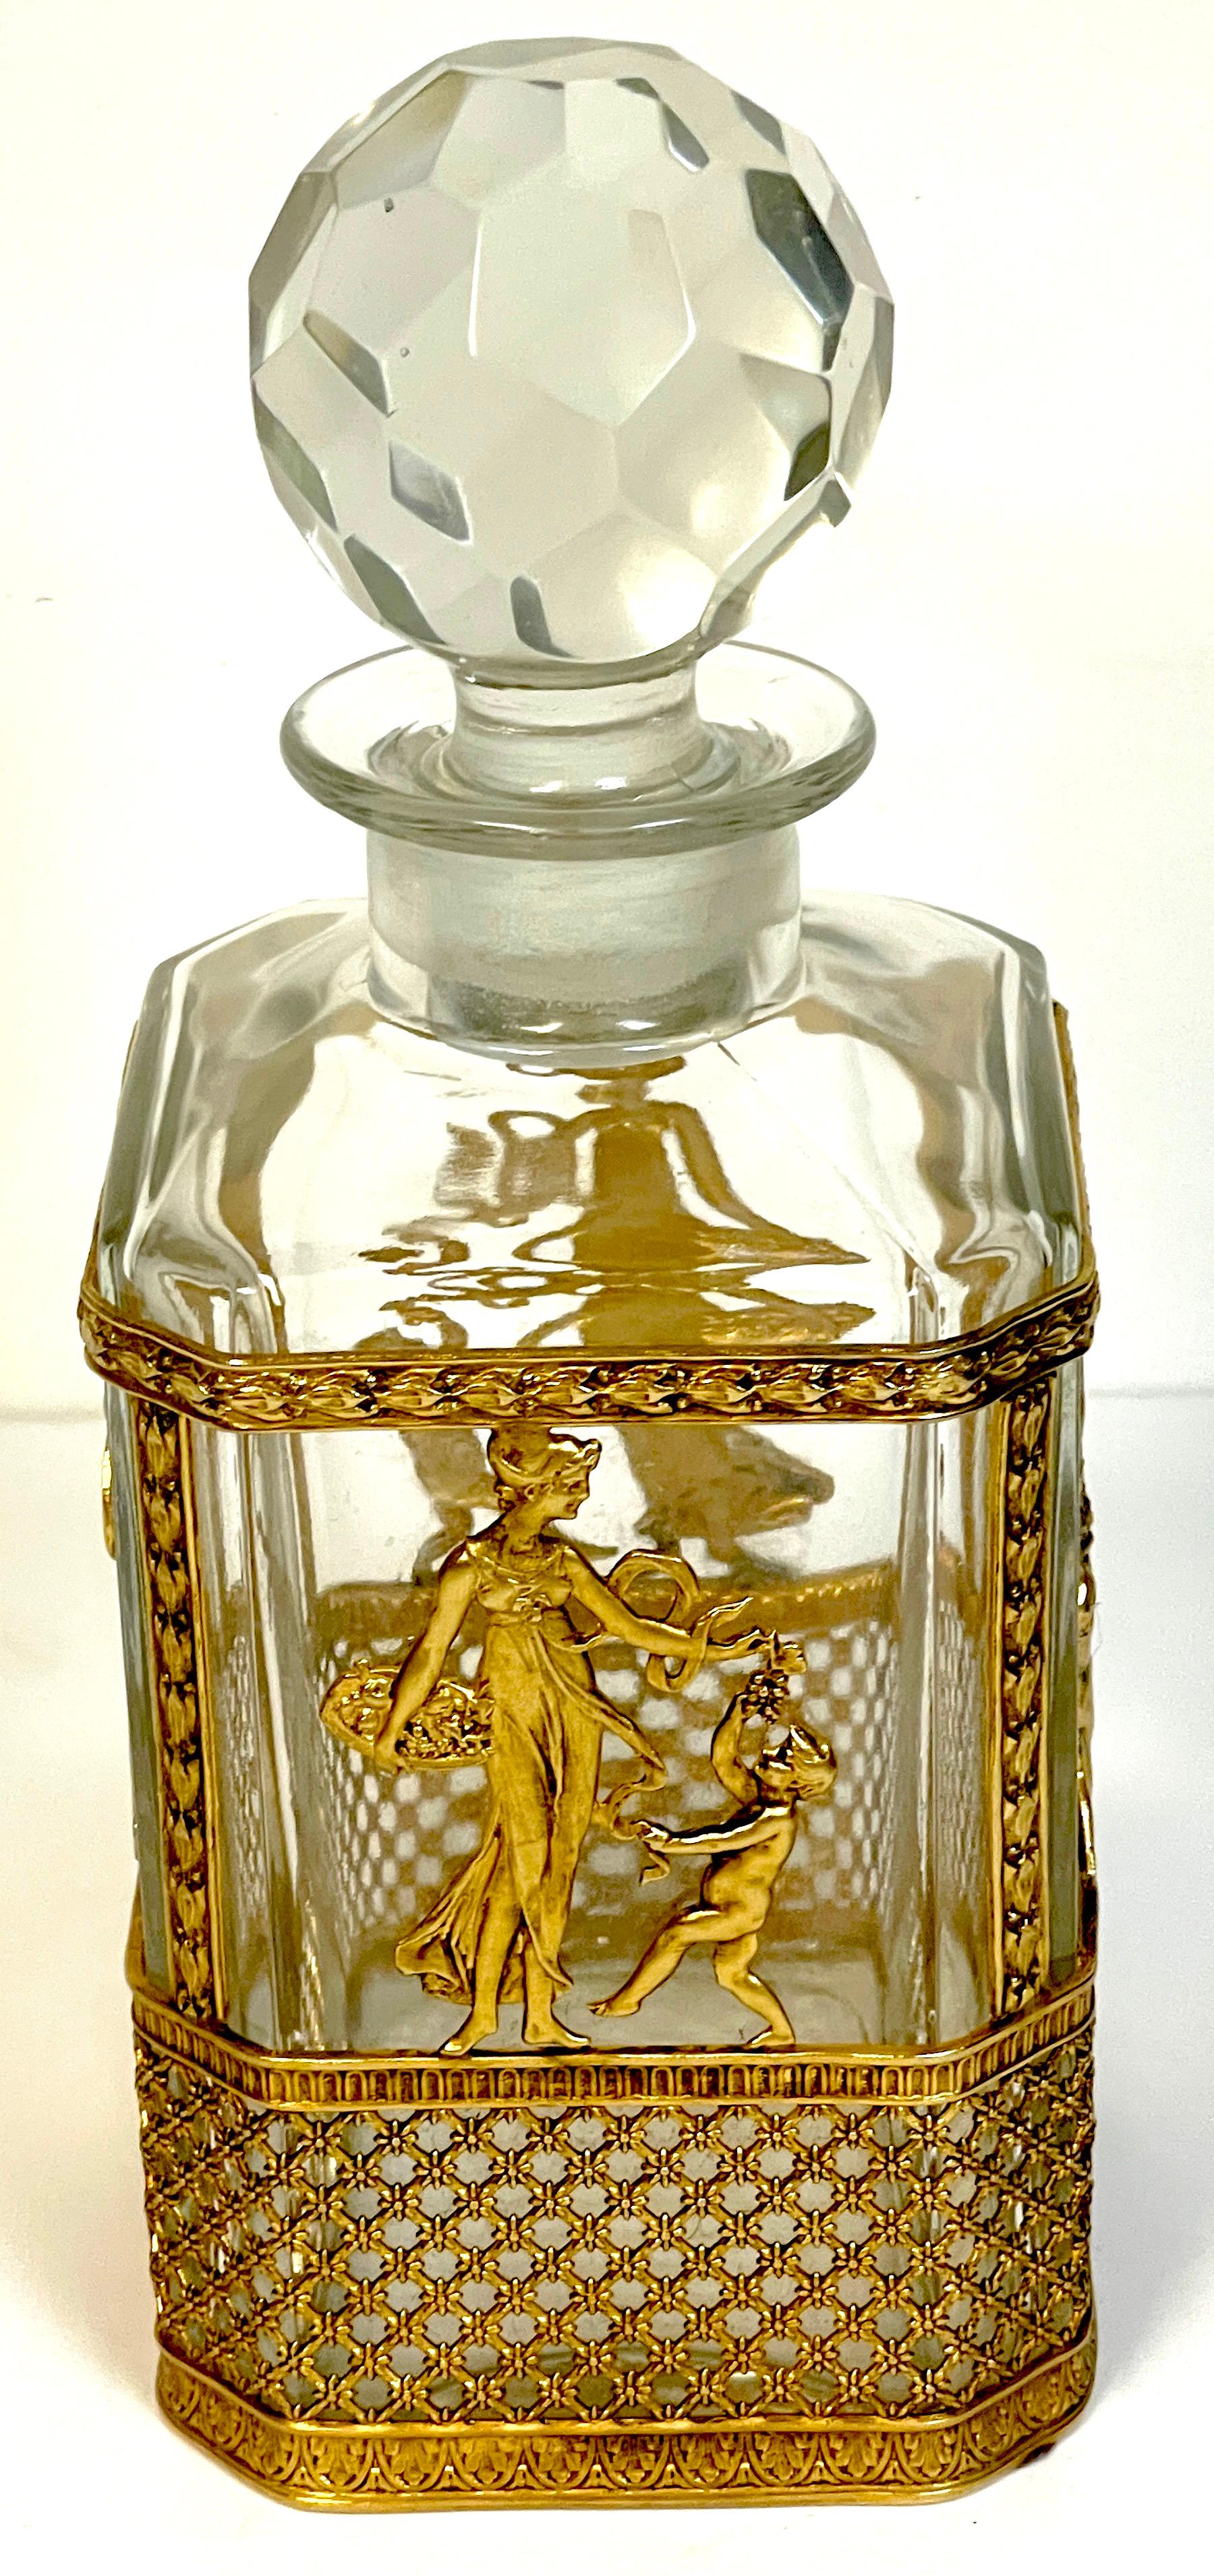 Empire Baccarat Style Ormolu Mounted Decanter For Sale 4